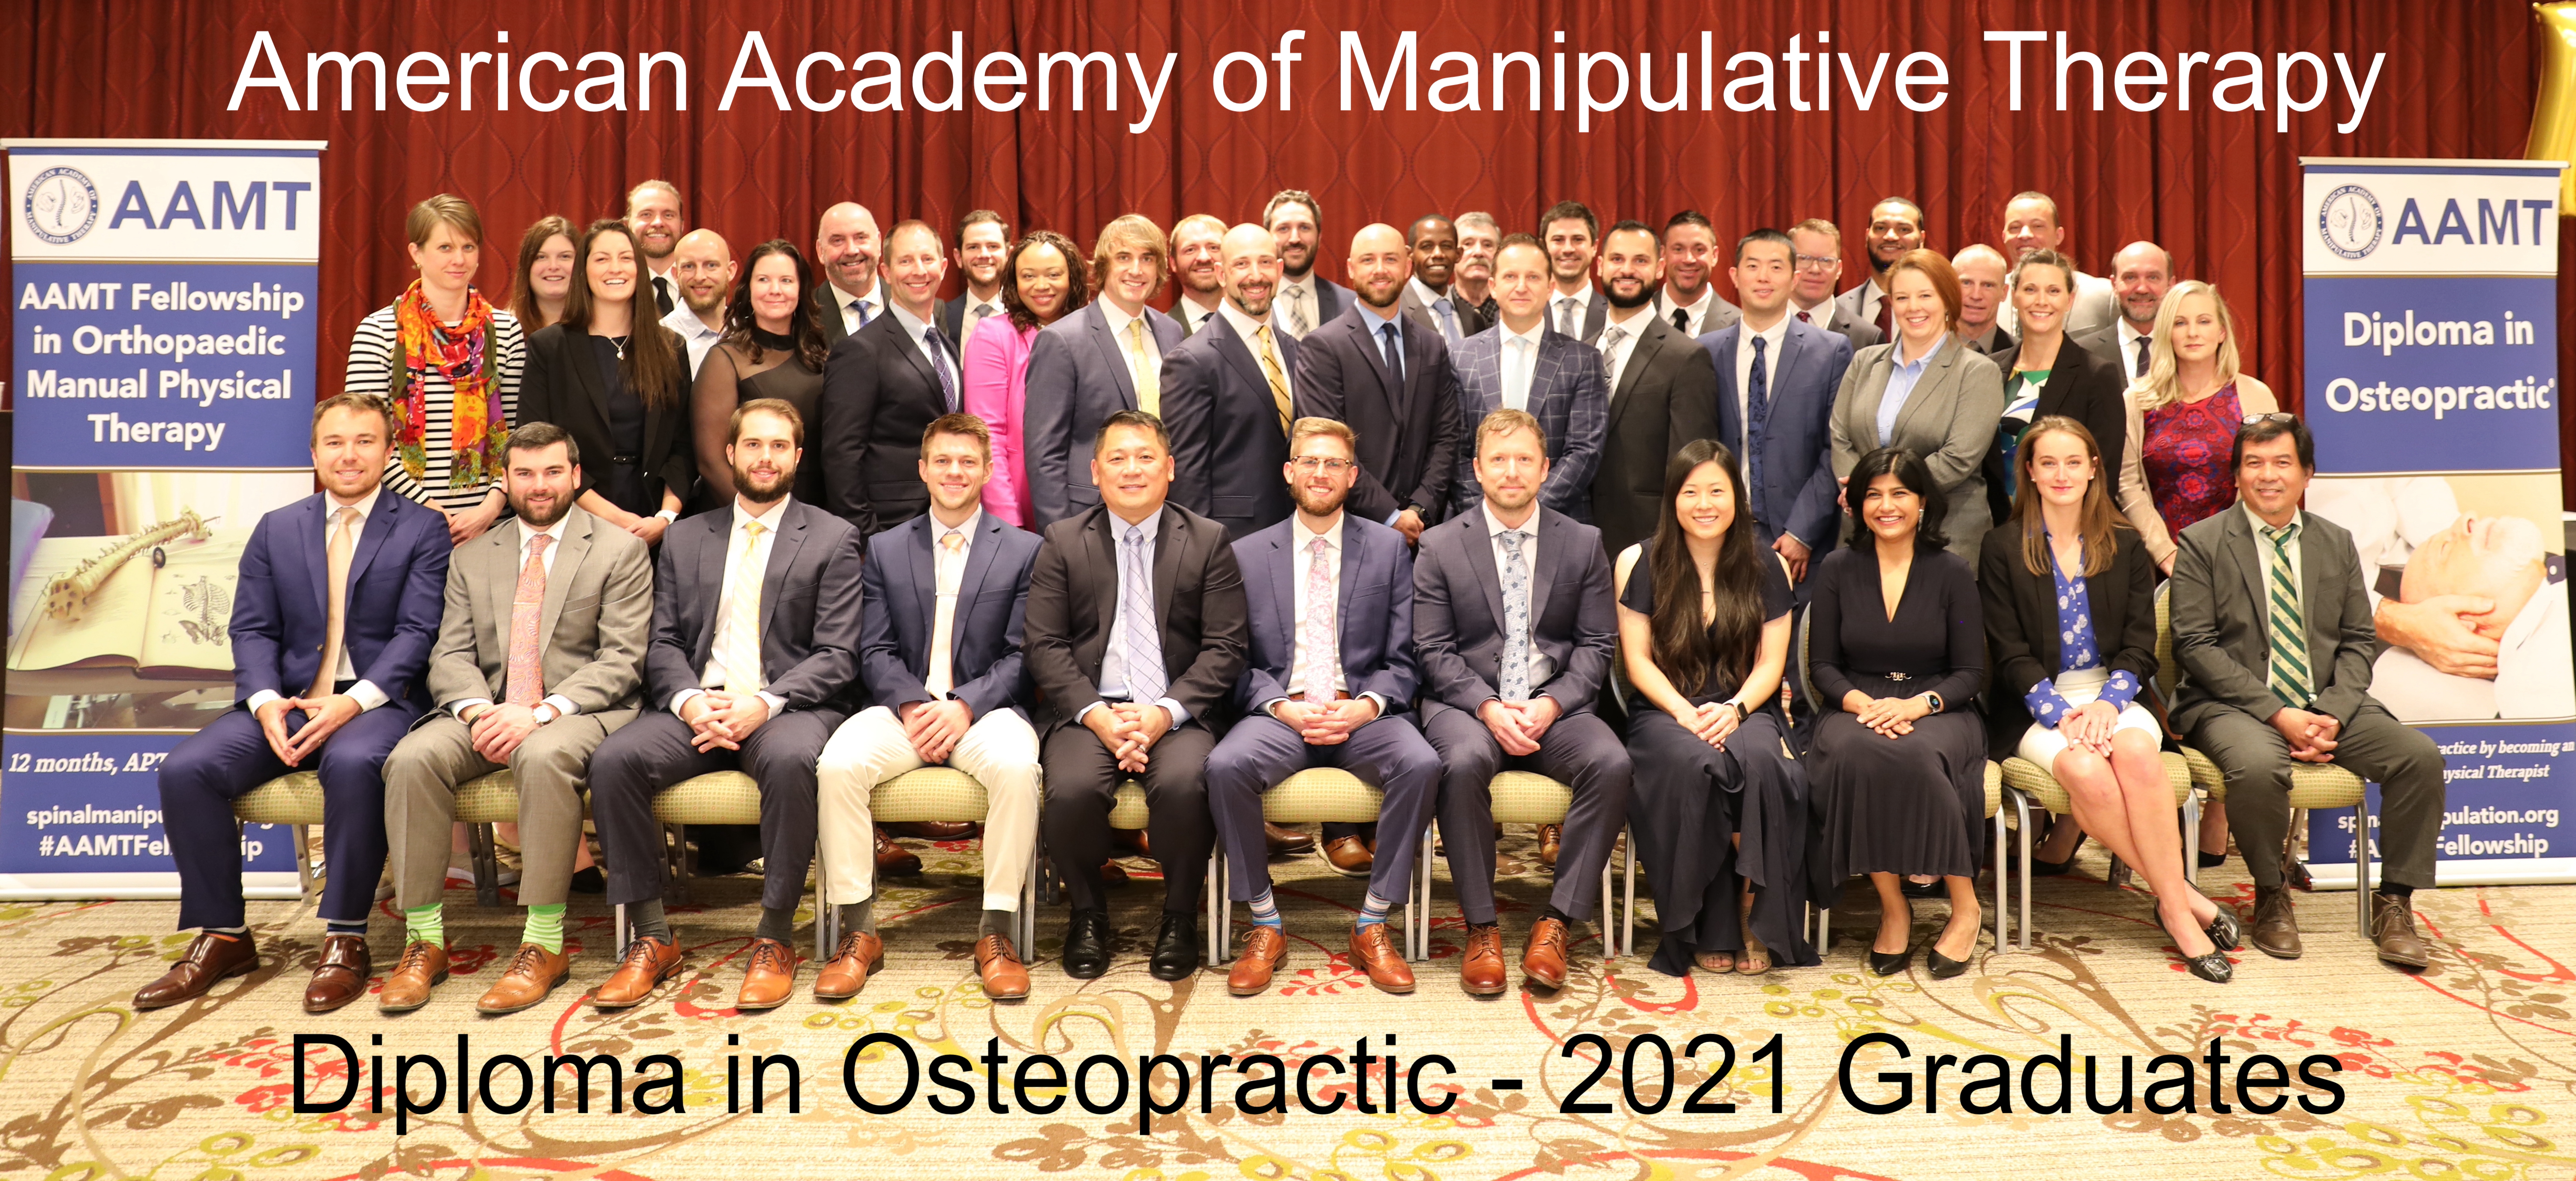 1 - 2021 Diploma in Osteopractic - Graduation Class Photo - 12.5.21 FINAL